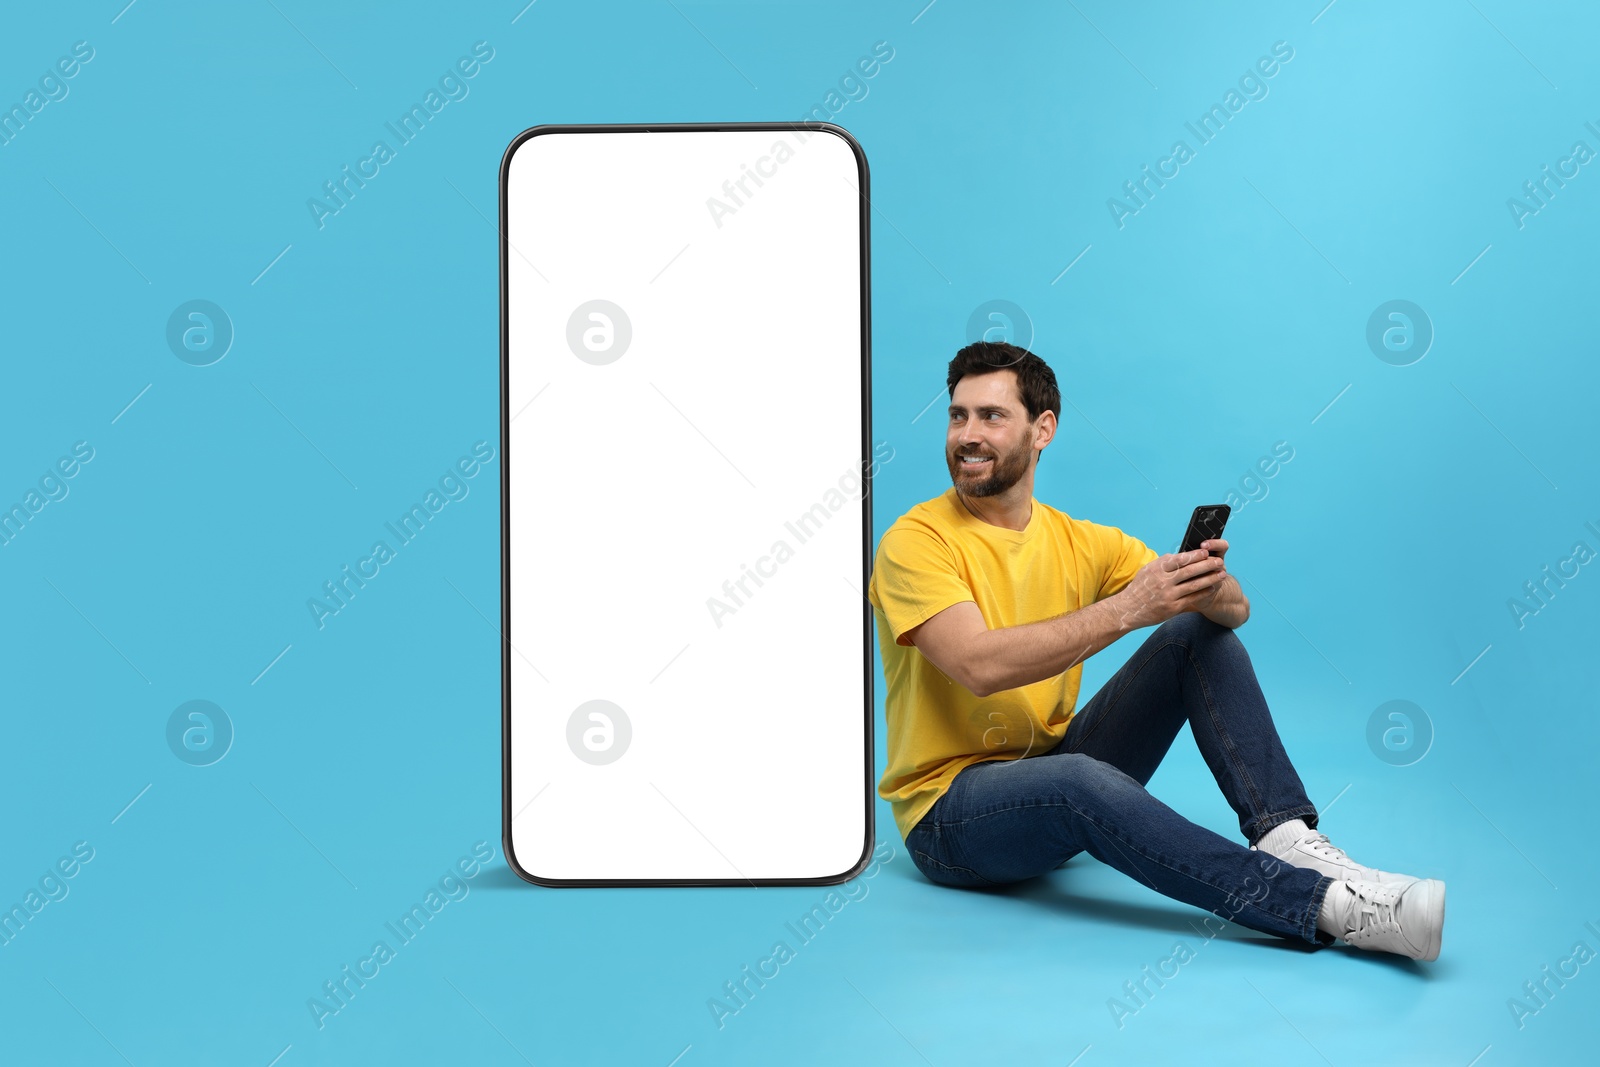 Image of Man with mobile phone sitting near huge device with empty screen on light blue background. Mockup for design